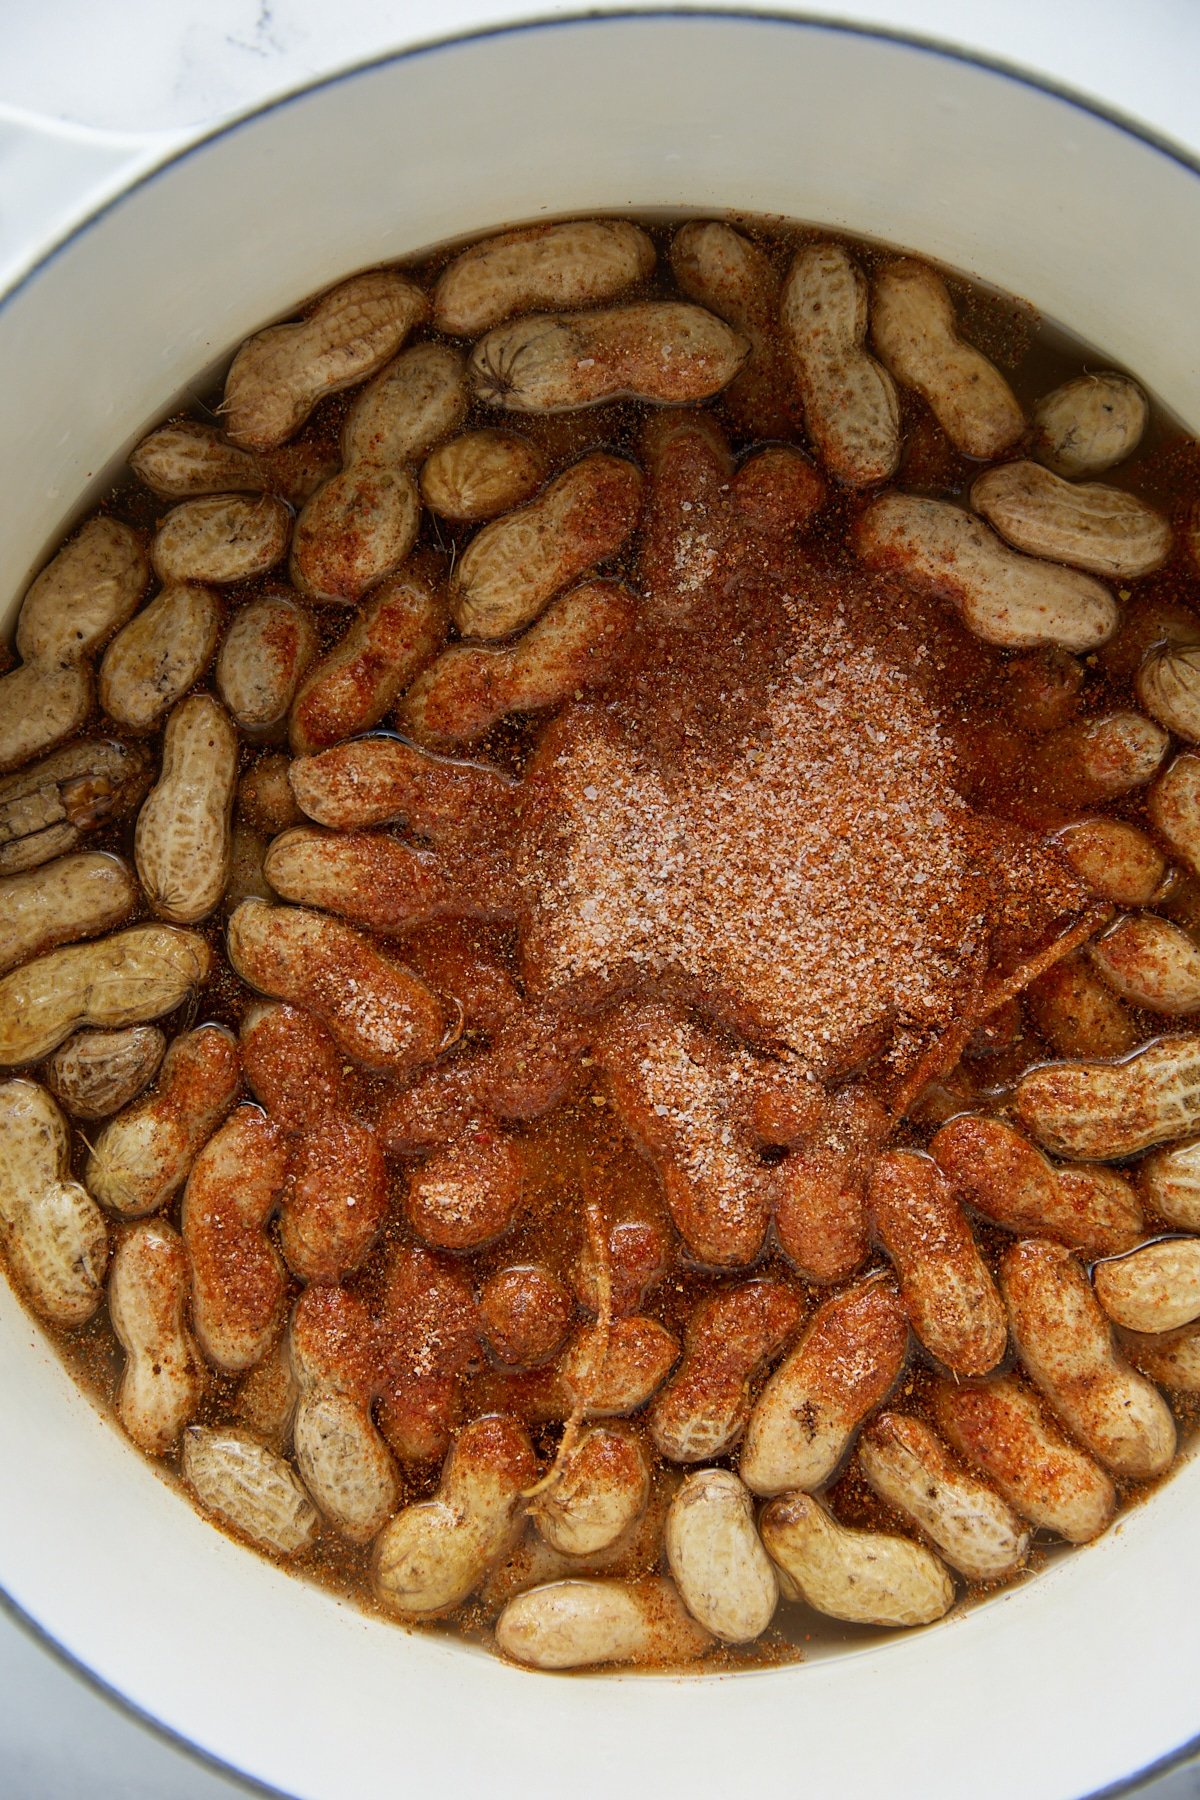 Seasonings added to the peanuts in a large pot.